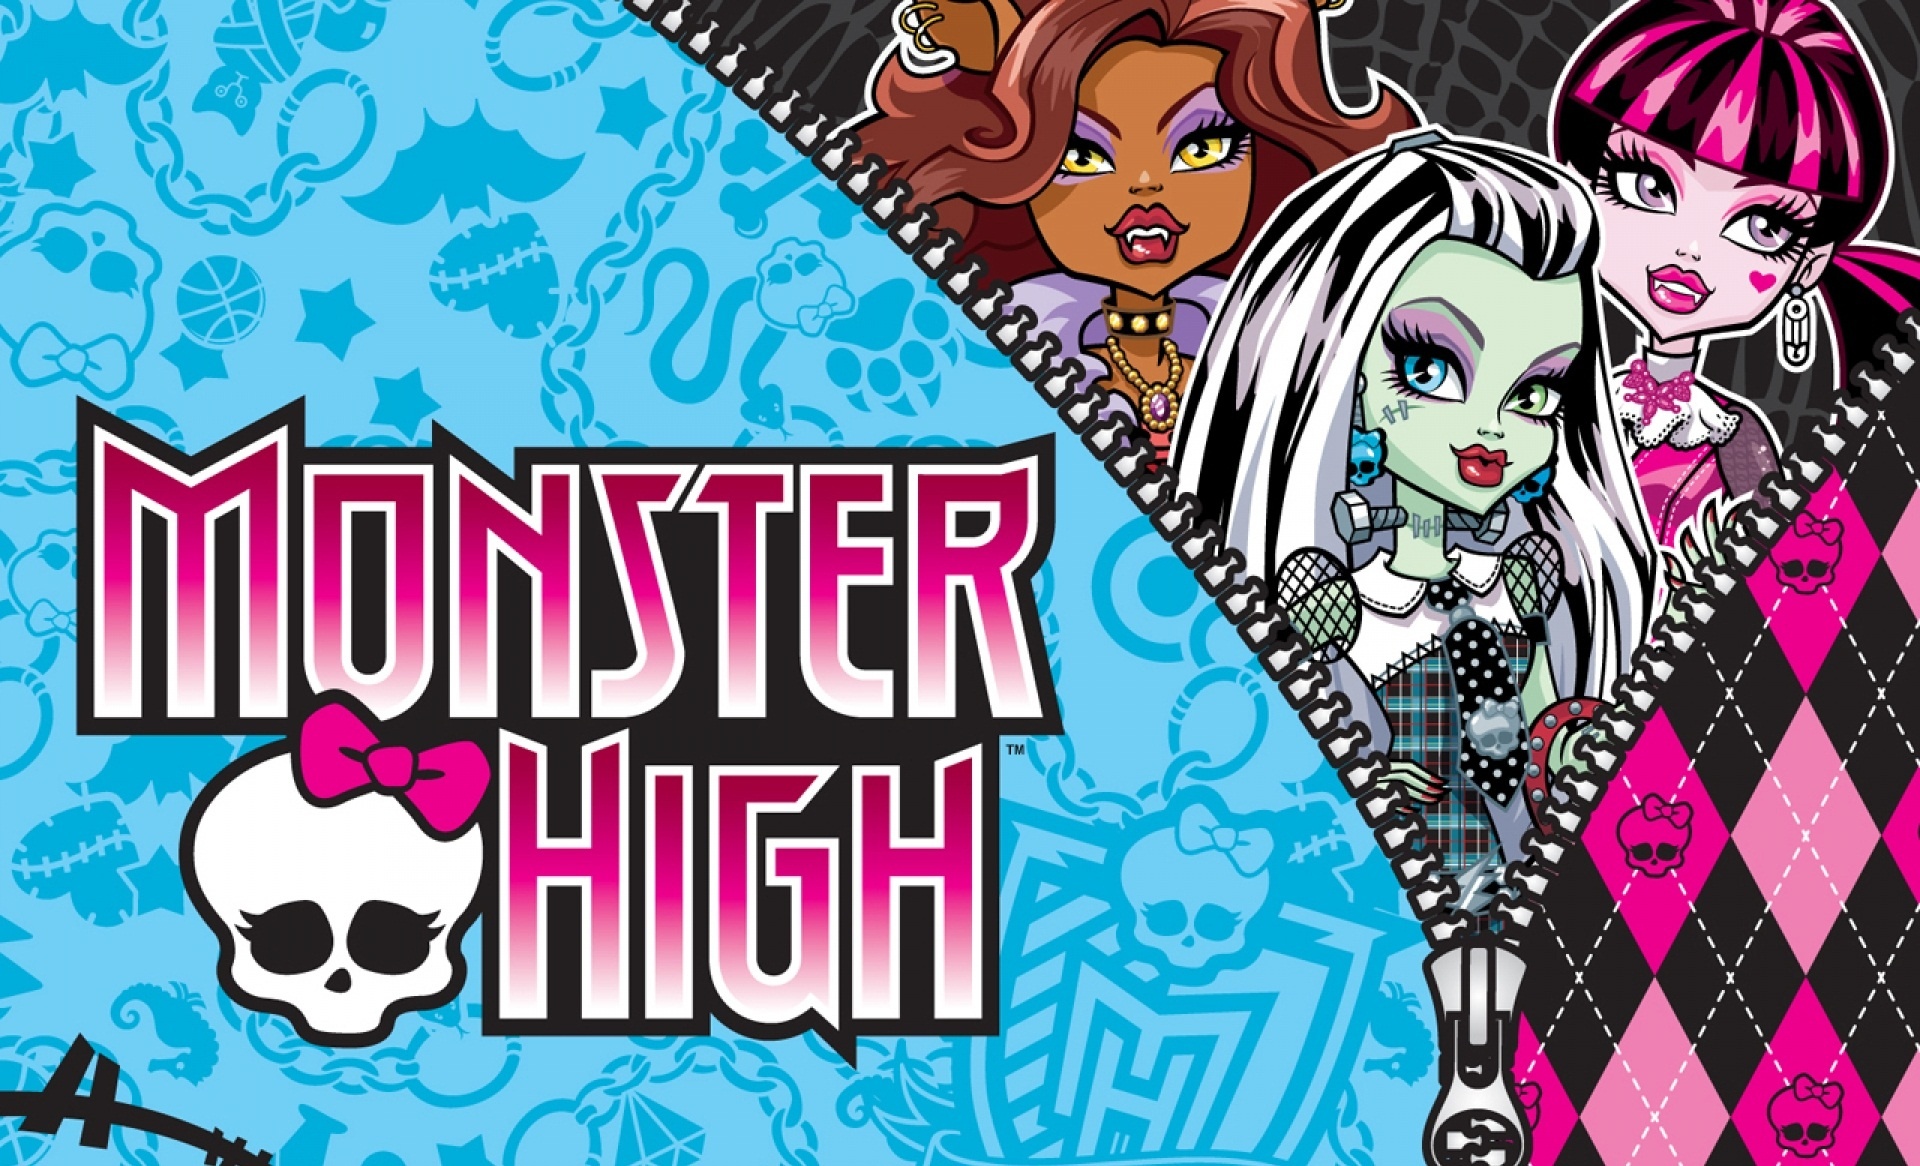 Monster High: The teenage children of famous monsters, Clawdeen Wolf, Draculaura, Frankie Stein, and Deuce Gorgon. 1920x1170 HD Wallpaper.